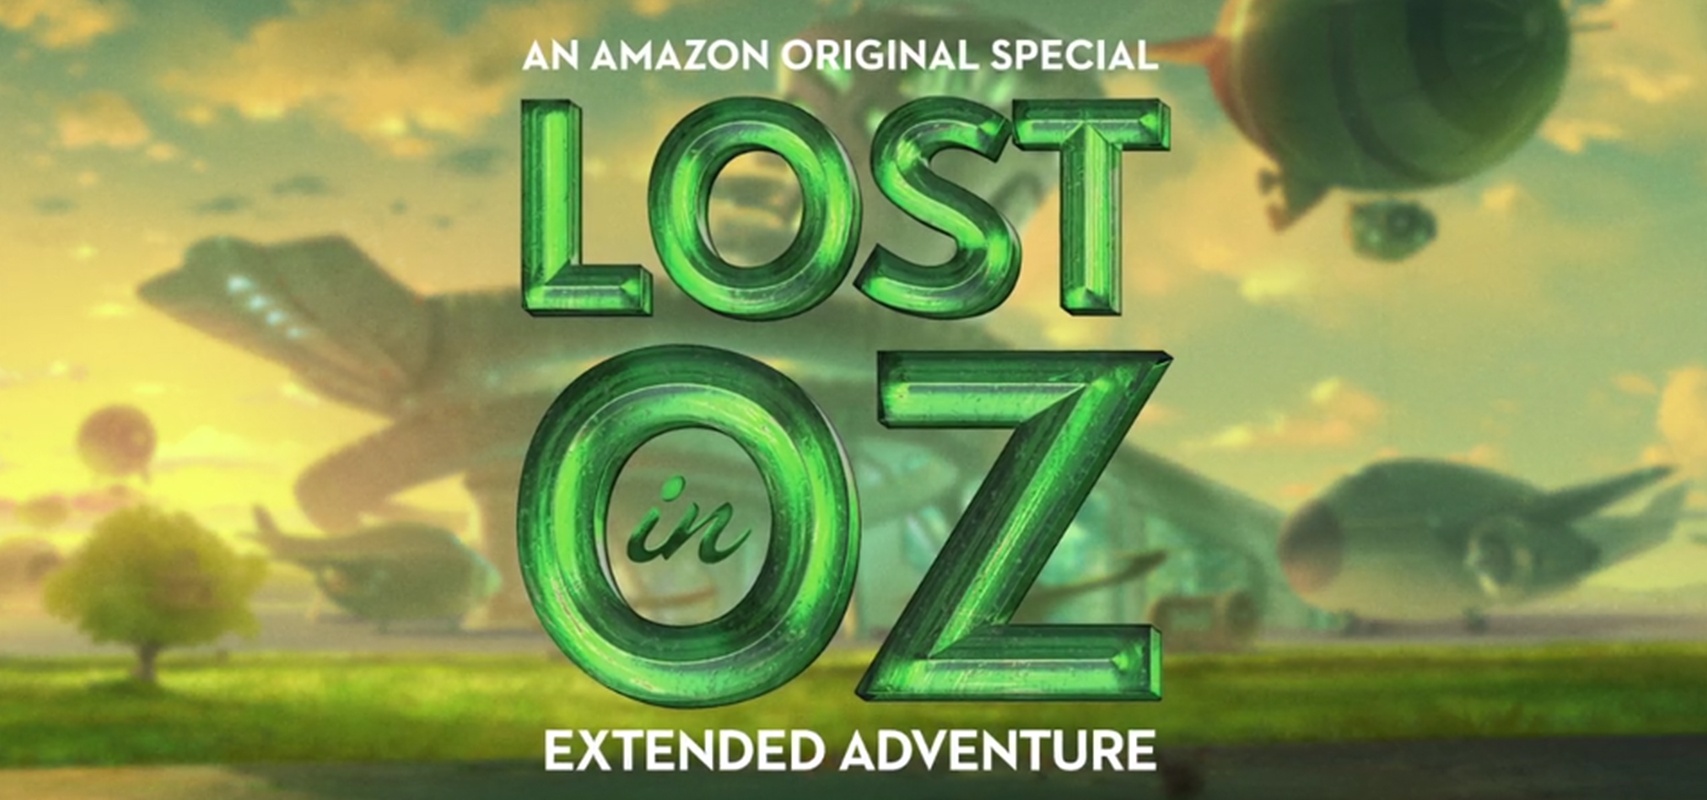 Amazon Special Lost in Oz Wins Three Daytime Emmy Awards